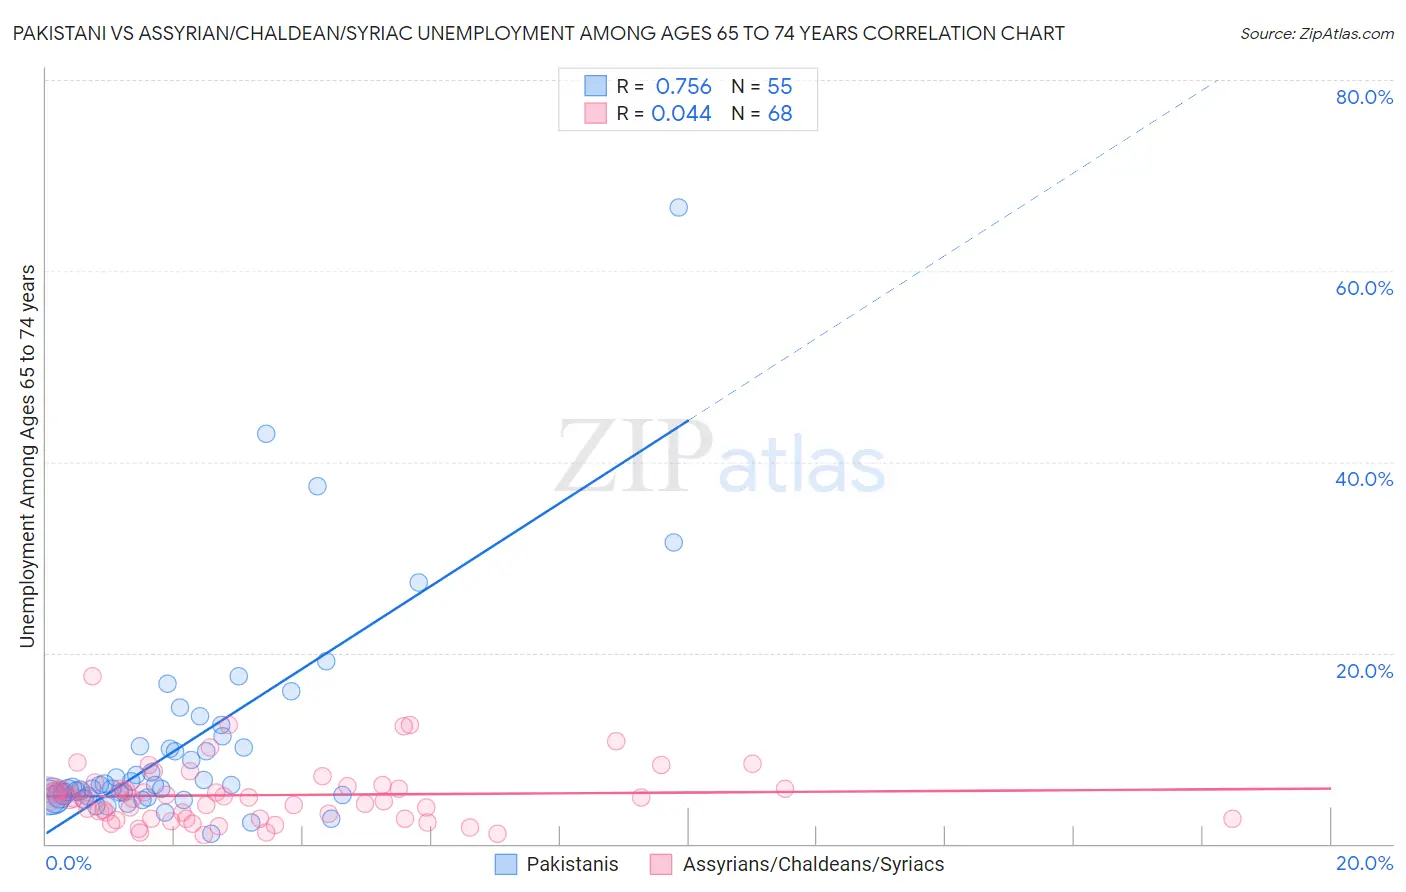 Pakistani vs Assyrian/Chaldean/Syriac Unemployment Among Ages 65 to 74 years